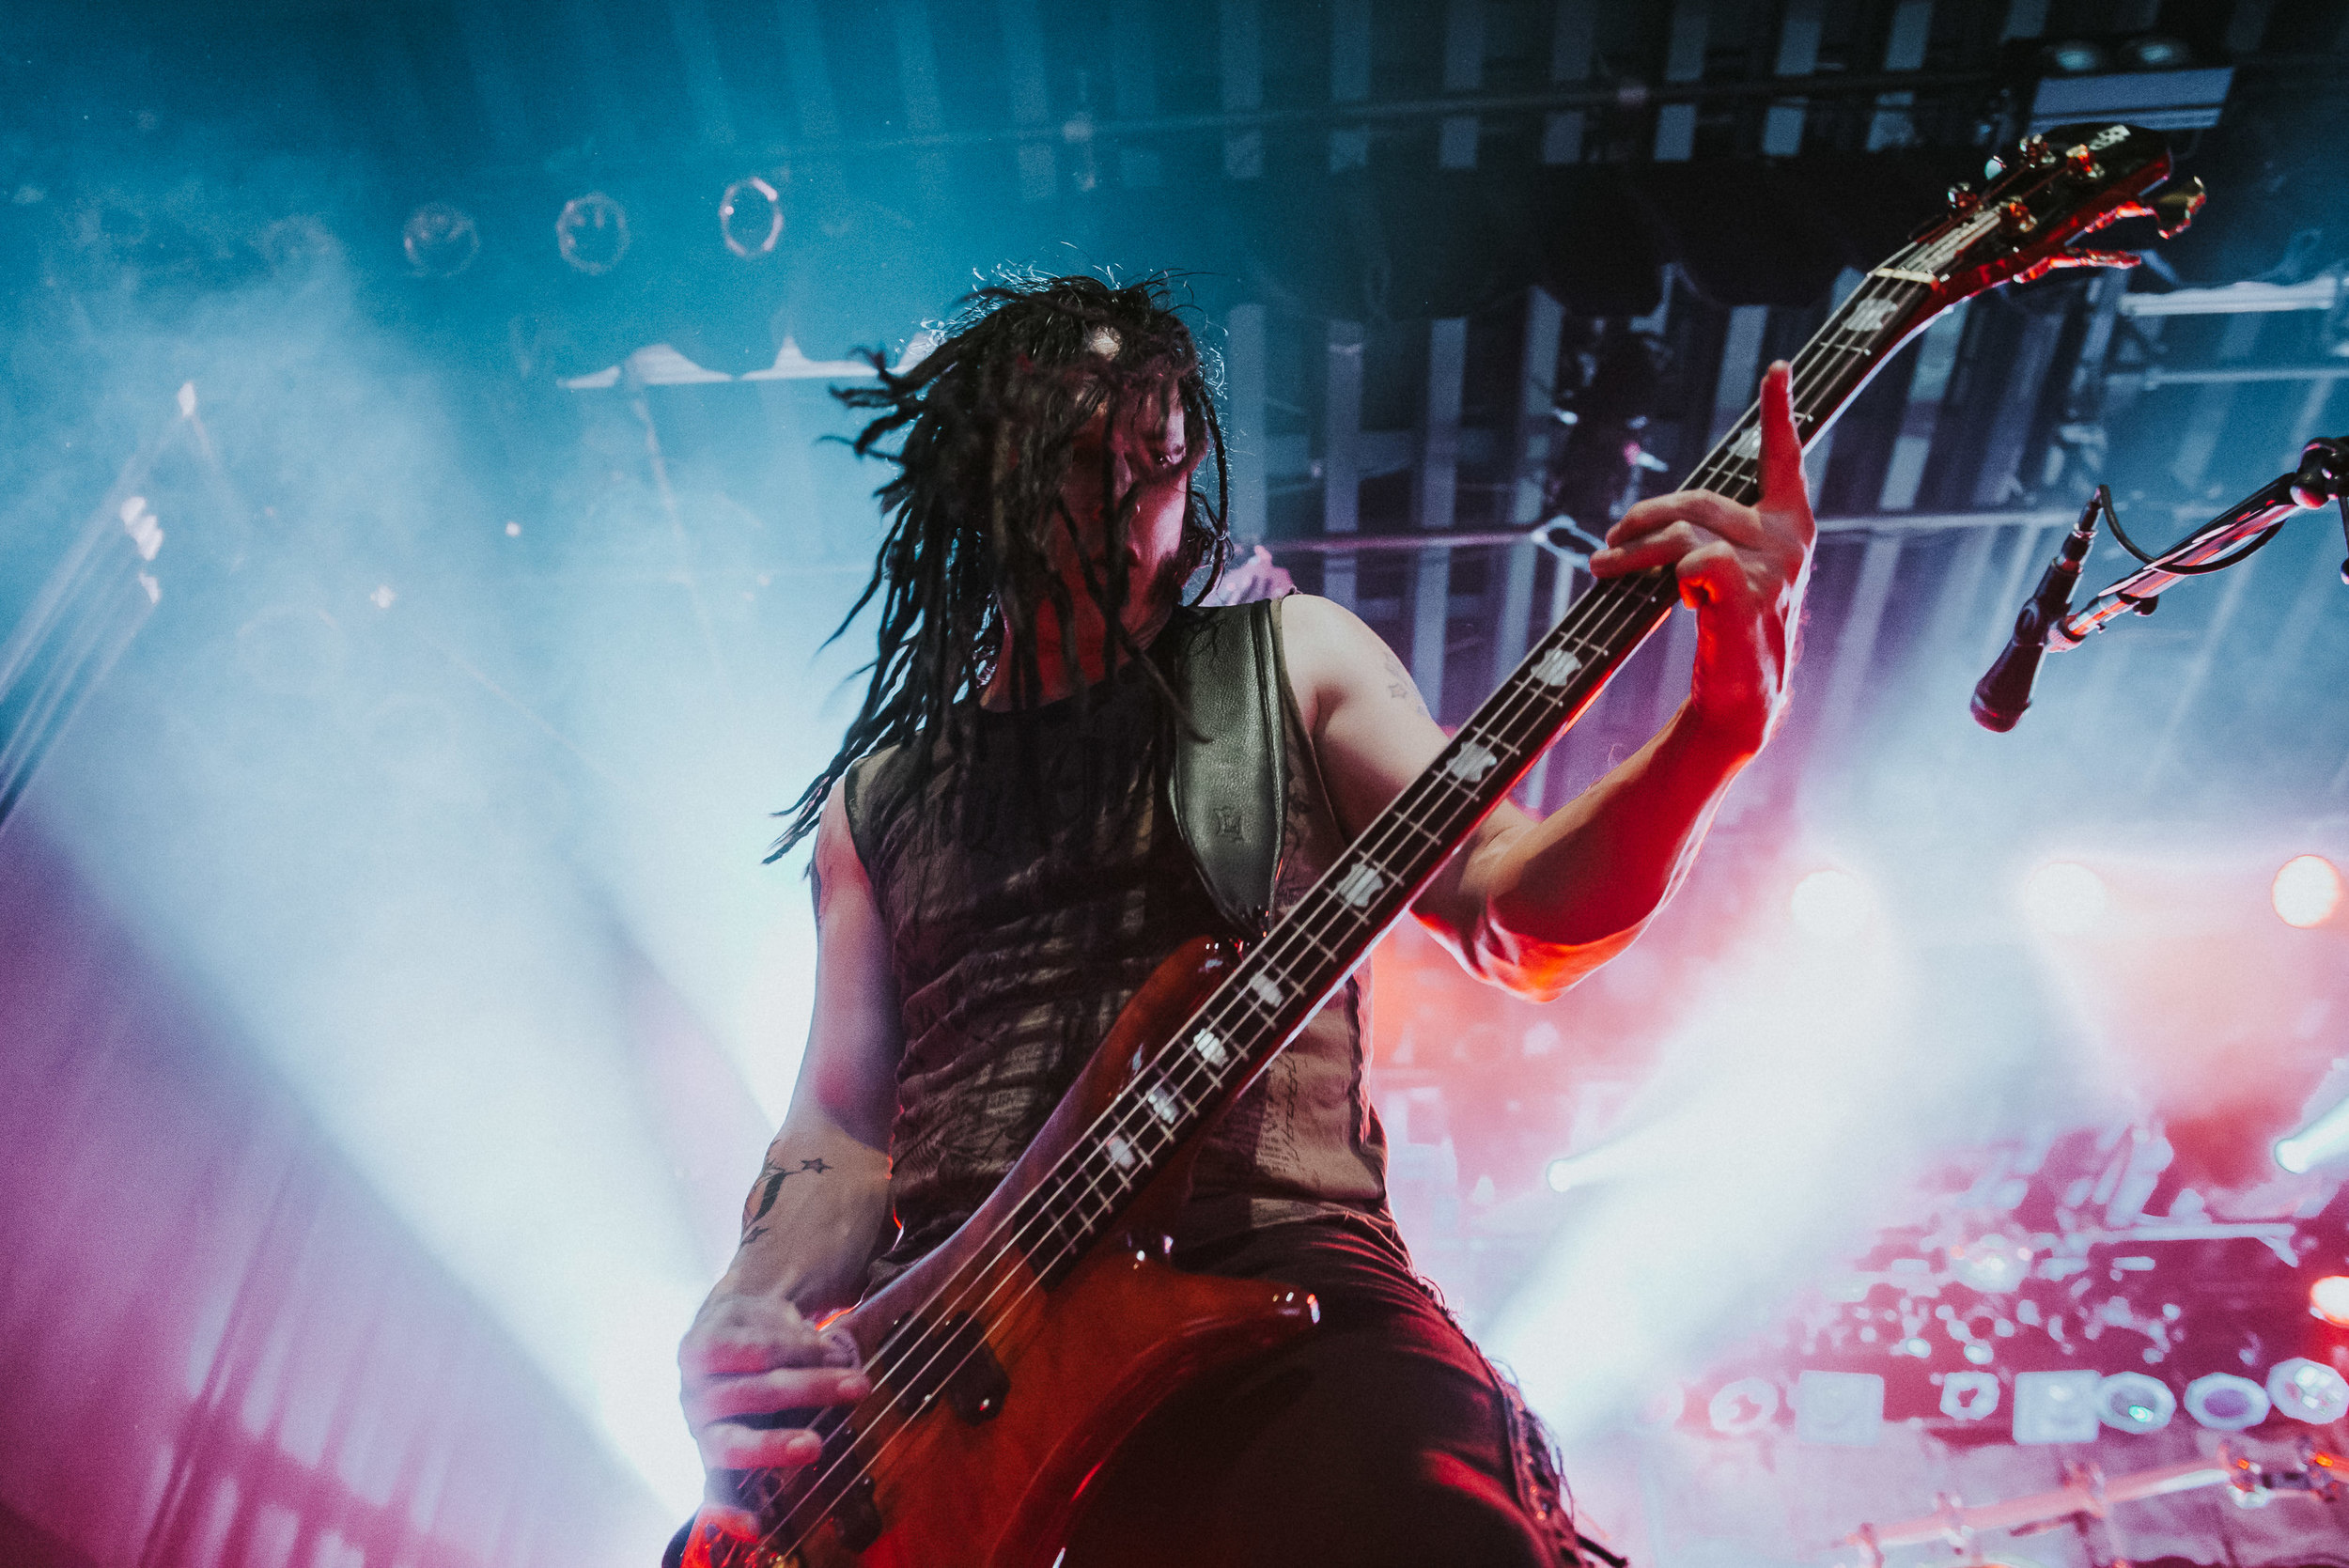 1_Disturbed_Commodore_Ballroom_Timothy-Nguyen_11March2016 (6 of 20).jpg